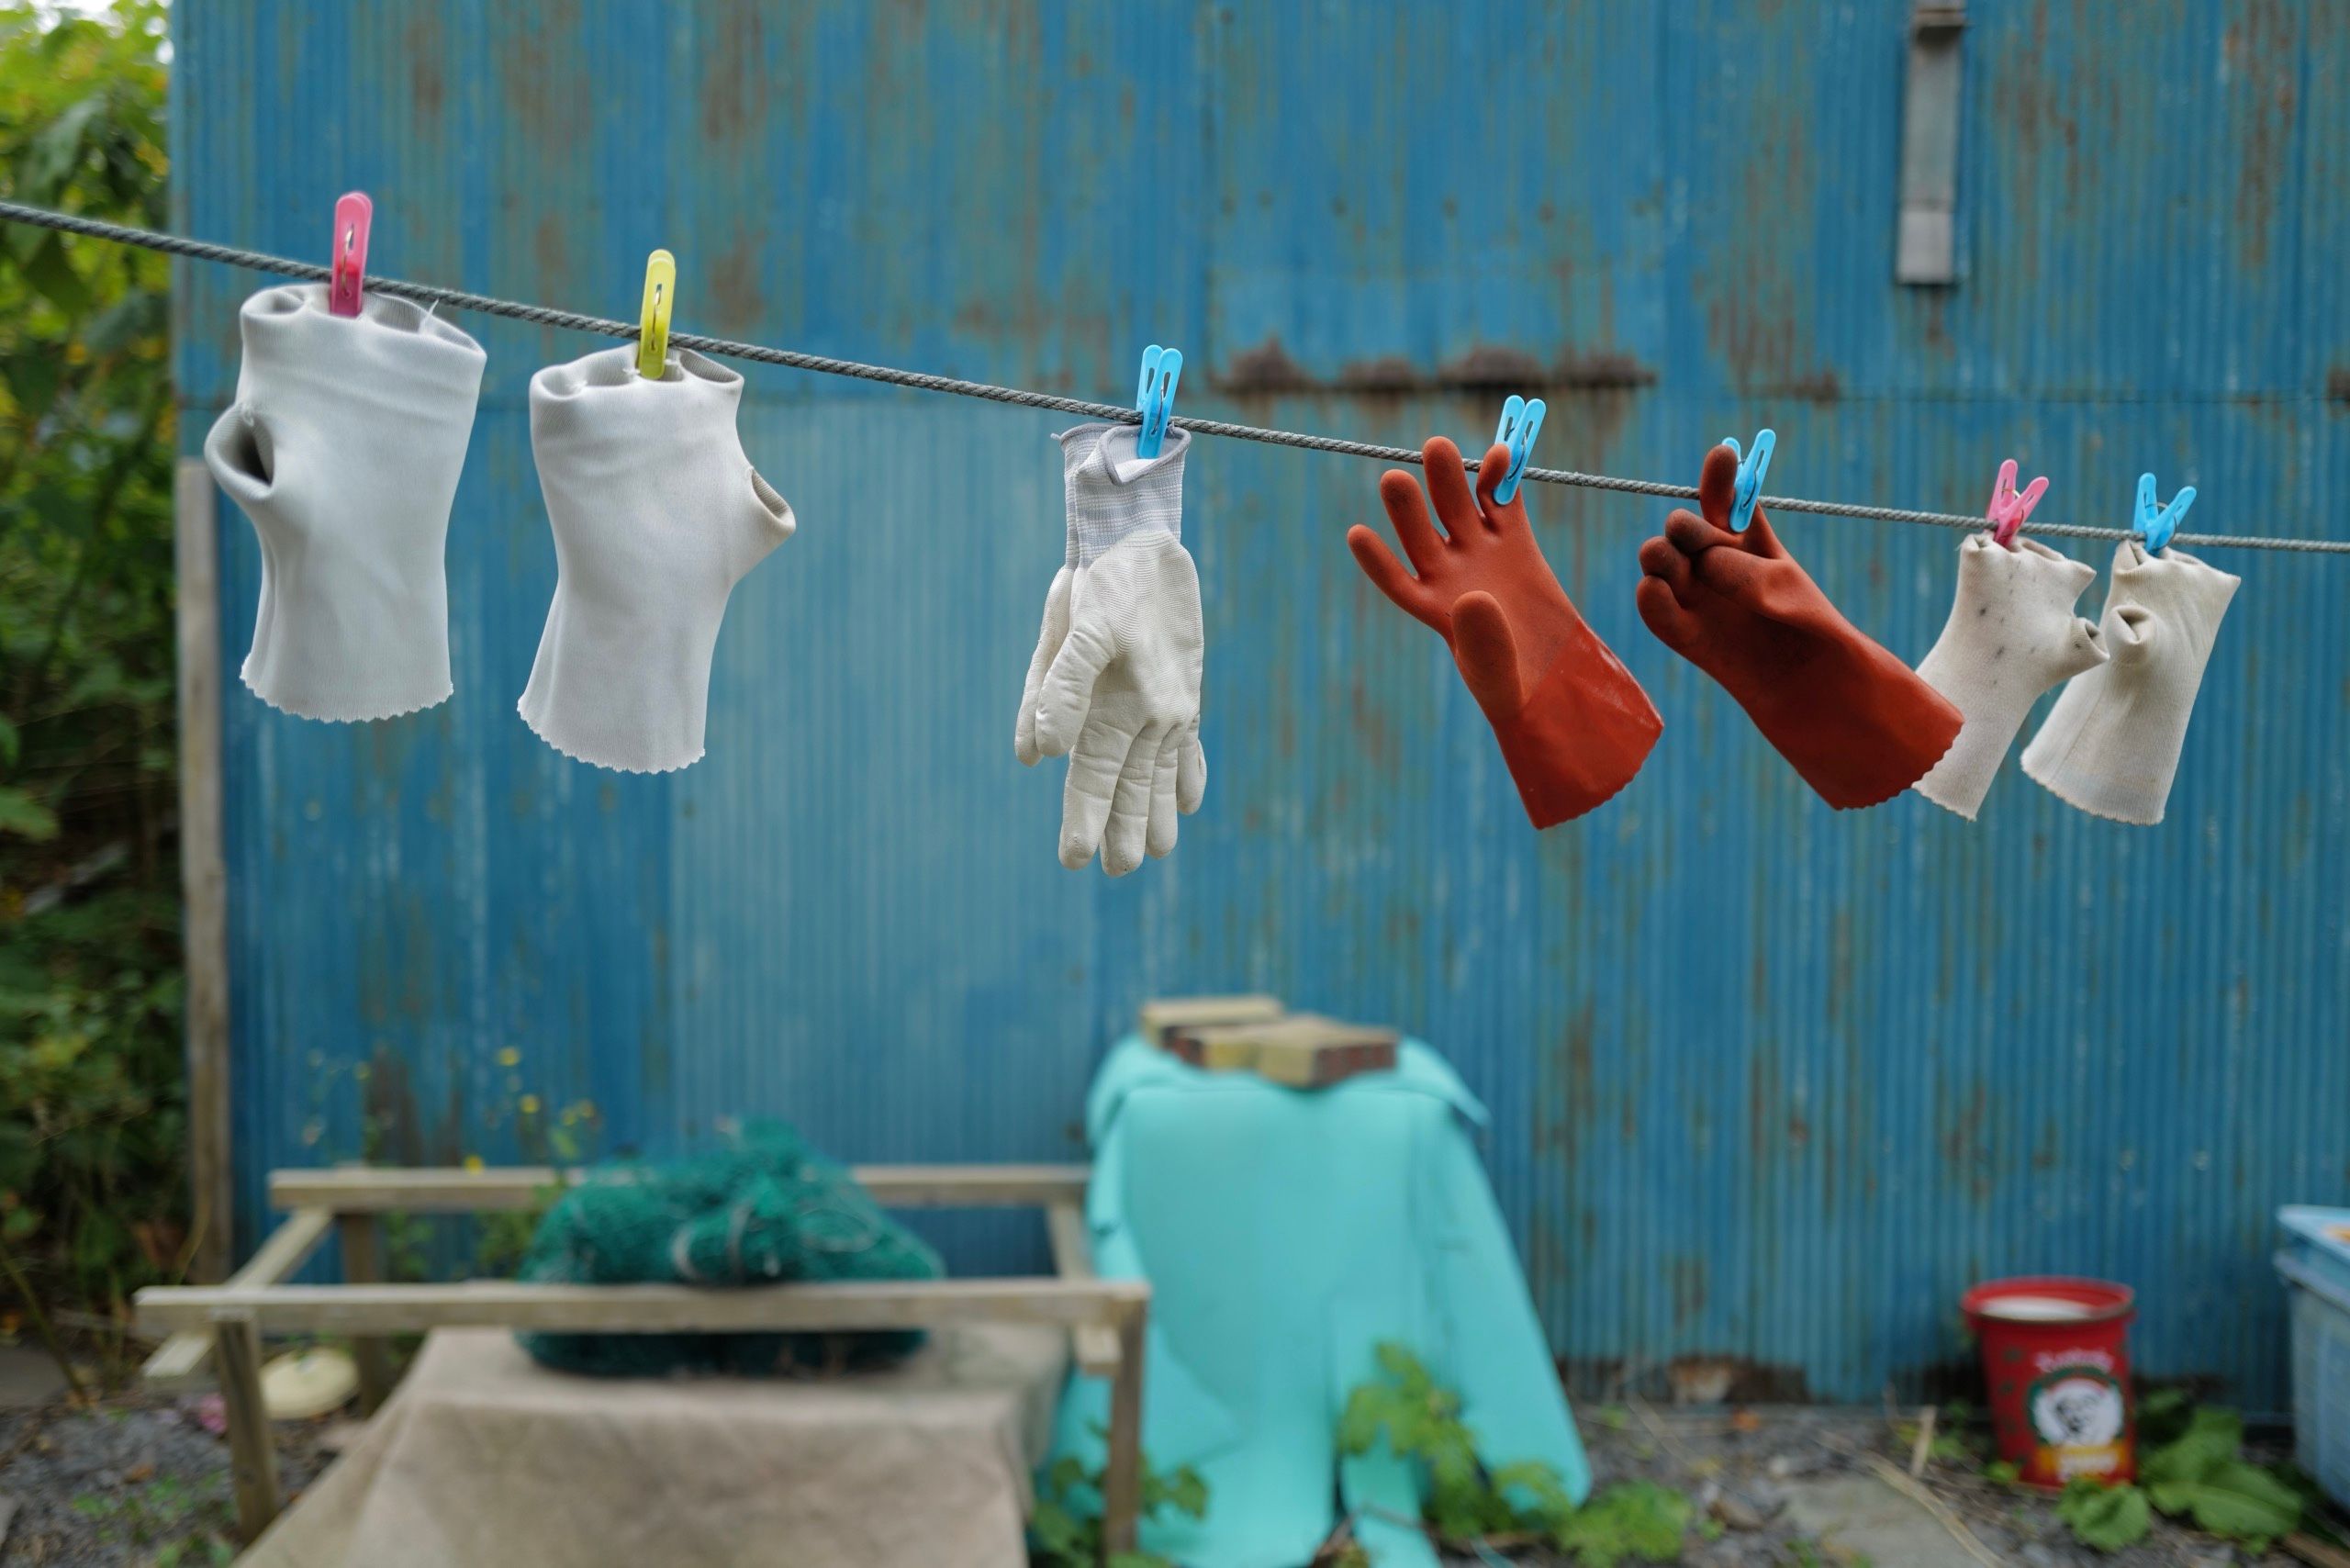 Fishing gloves, some white and two red, dry on a clothing line against a blue wall